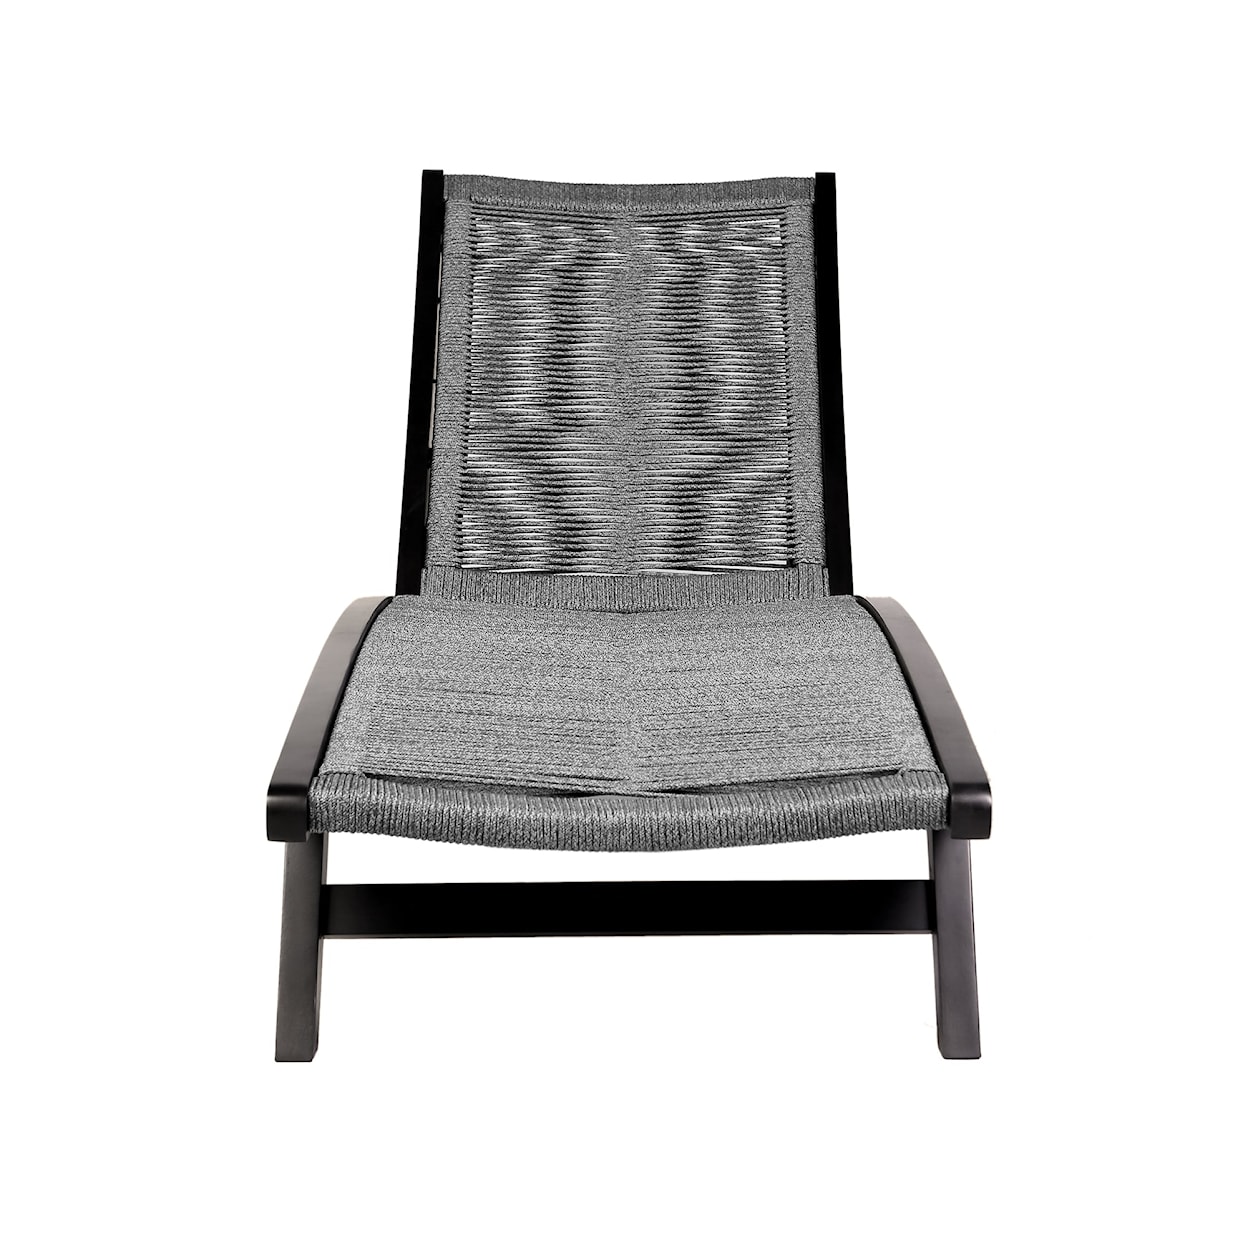 Armen Living Chateau Outdoor Chaise Lounge Chair